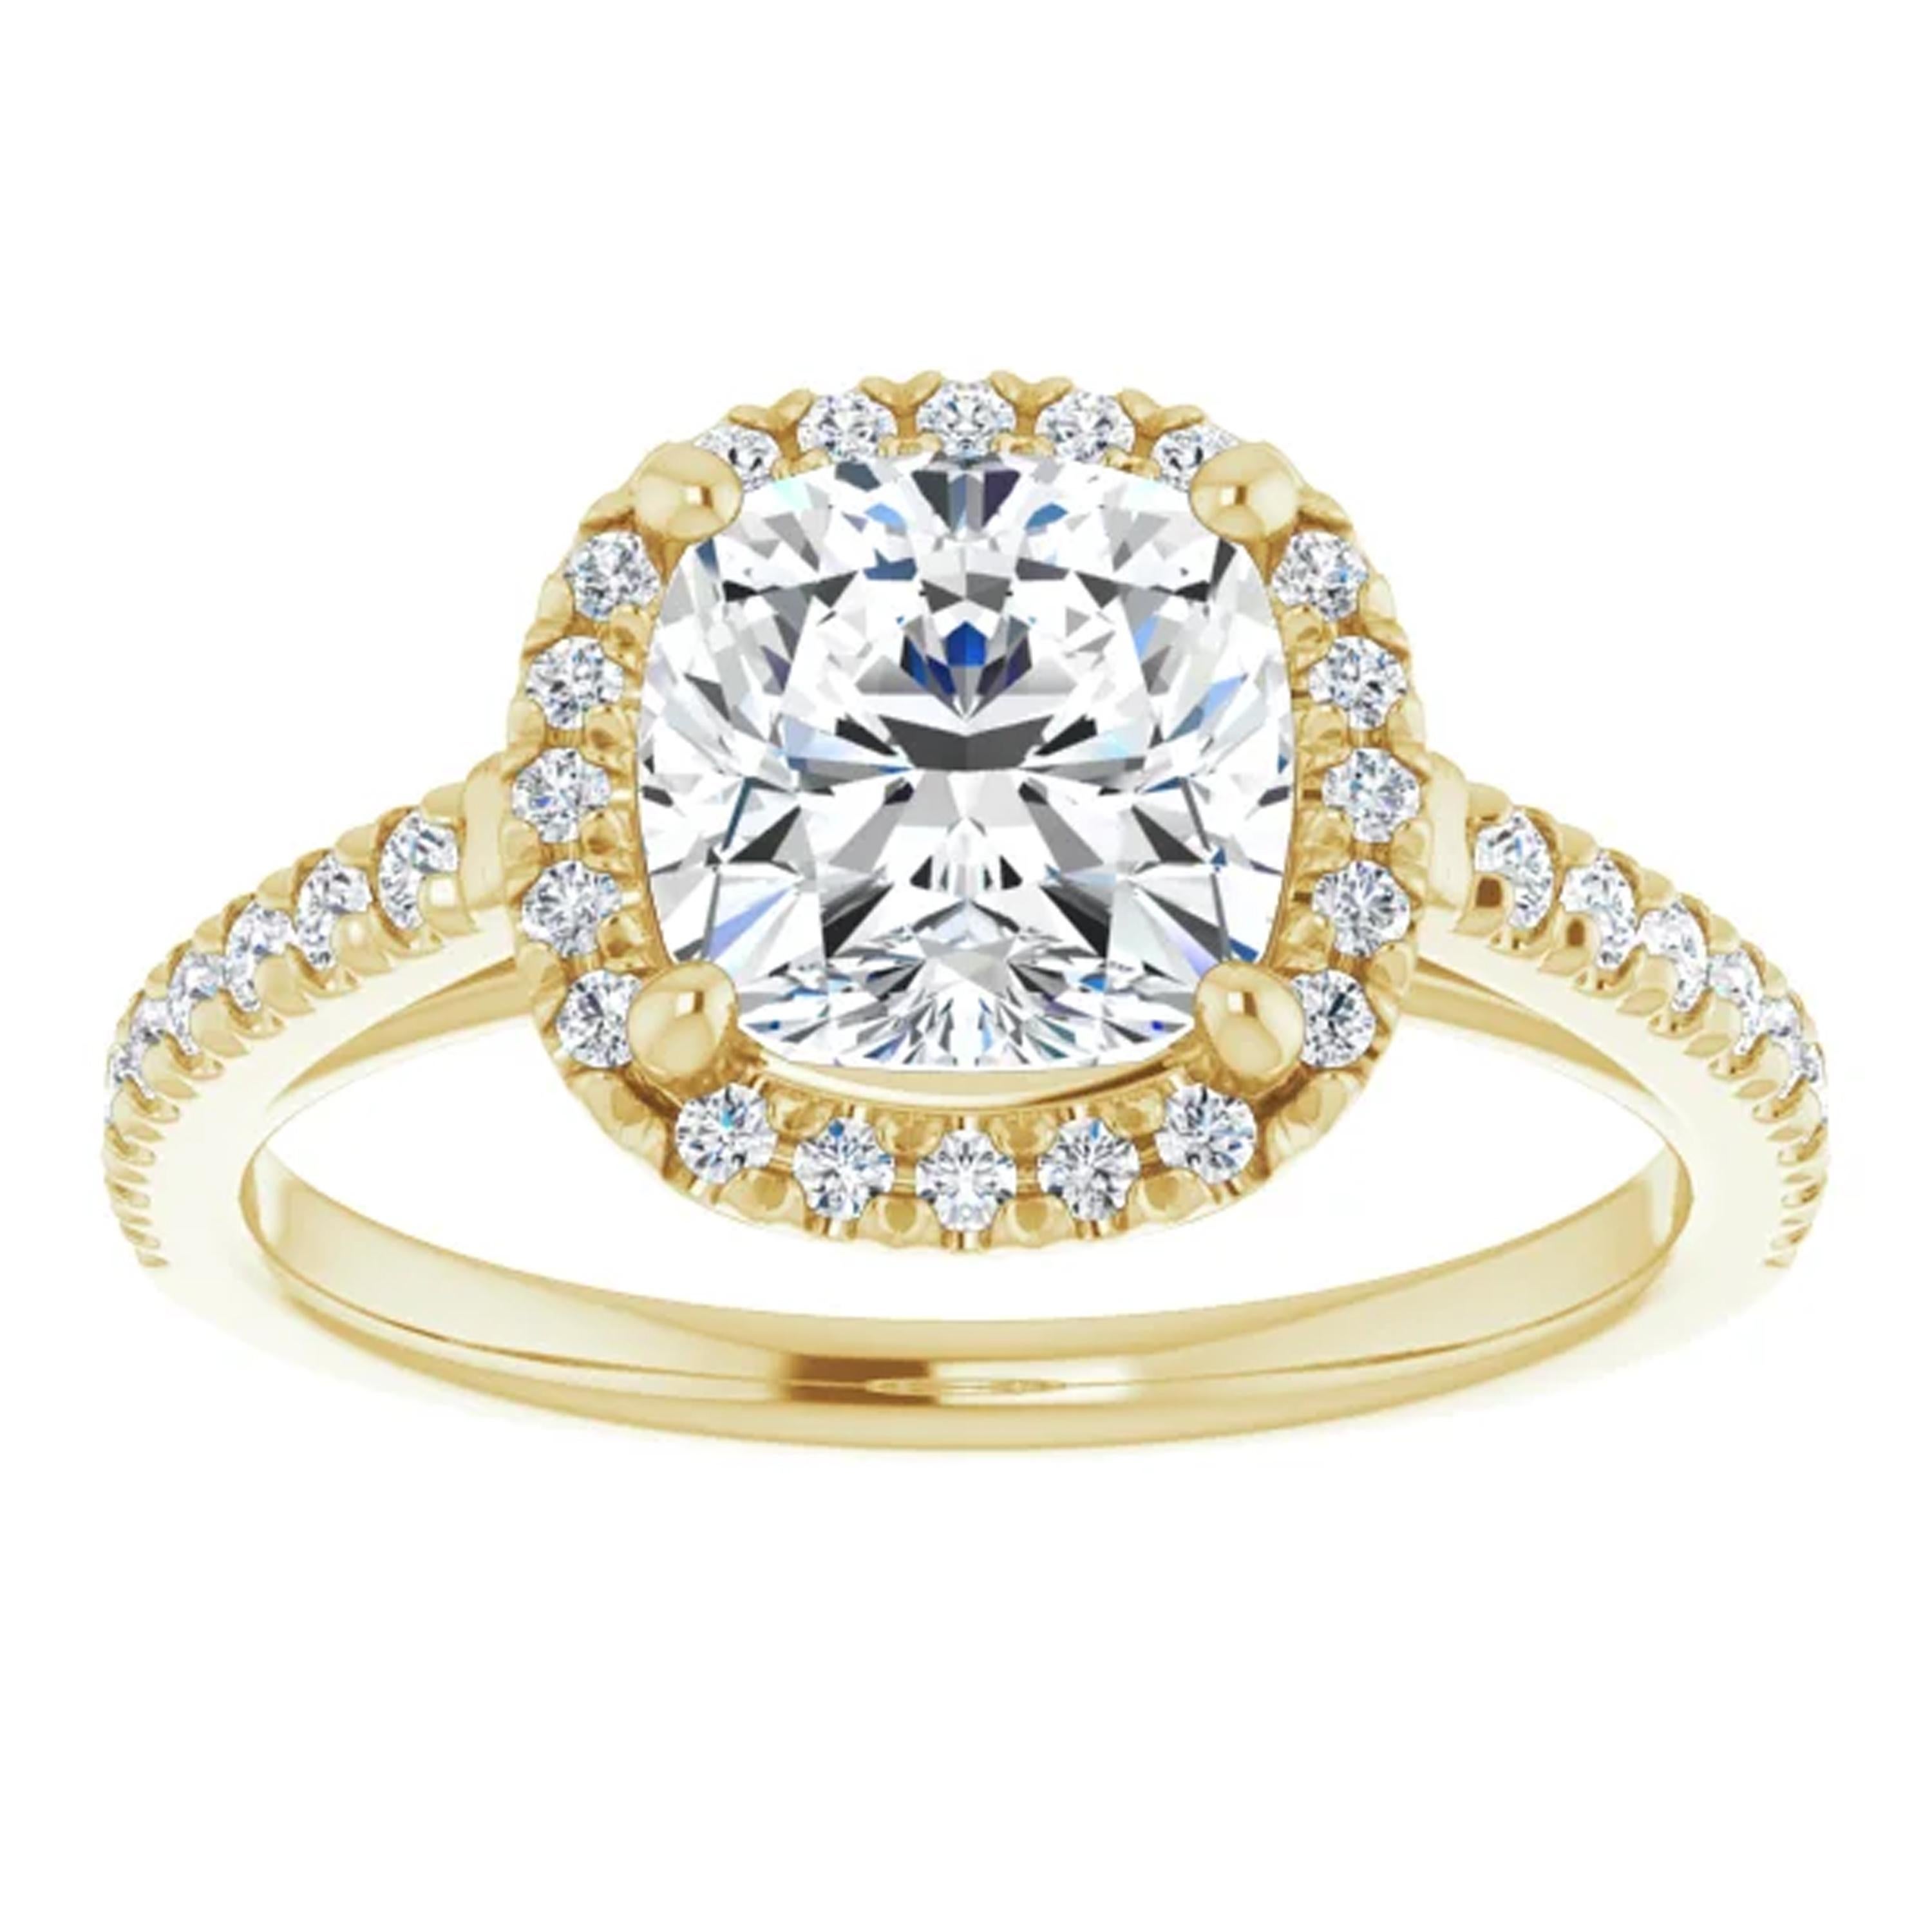 Handcrafted in 14k yellow gold, shimmering white diamonds surround the GIA certified center stone on this engagement ring. Closely set together with exposed sides additional diamonds line the shank. 

Style Number: ScintilleNora-1872589

Center